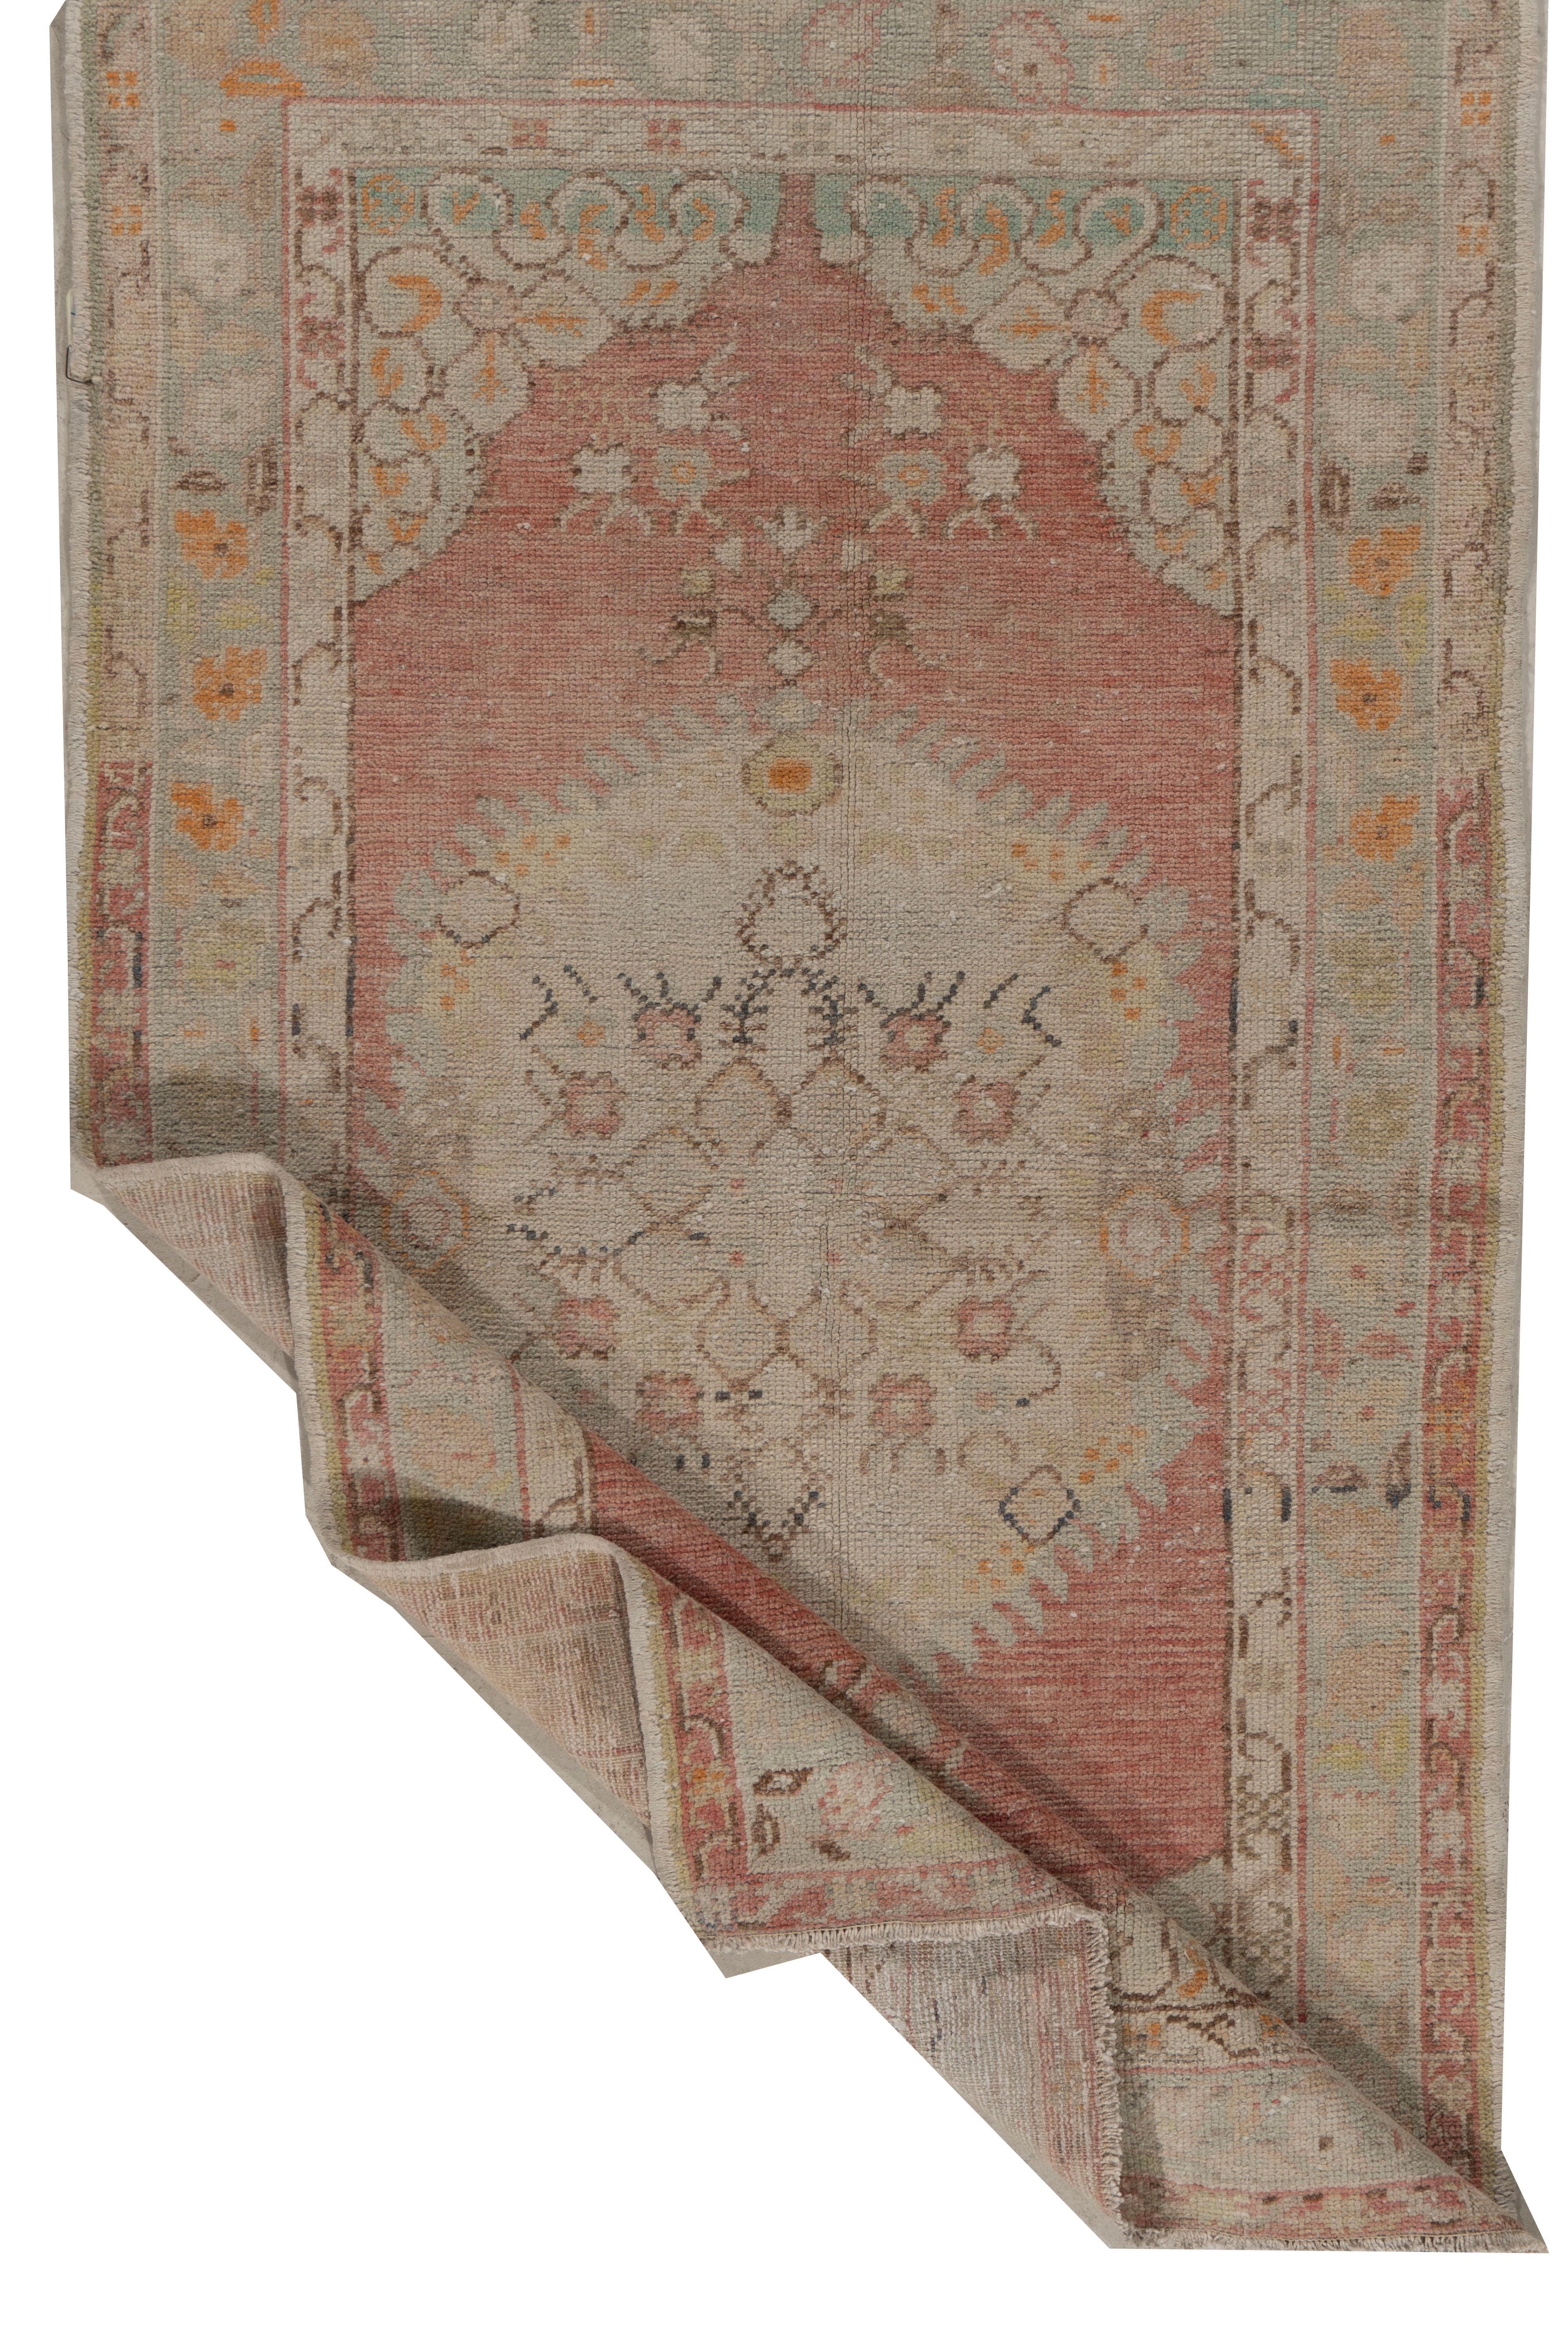 Vintage Turkish Oushak Area Rug 3'3 X 5'3. Oushak's are known for their soft palettes combined with eccentric drawing. Oushak in western Turkey has the longest continuous rug weaving history, stretching back at least to the mid-fifteenth century. It